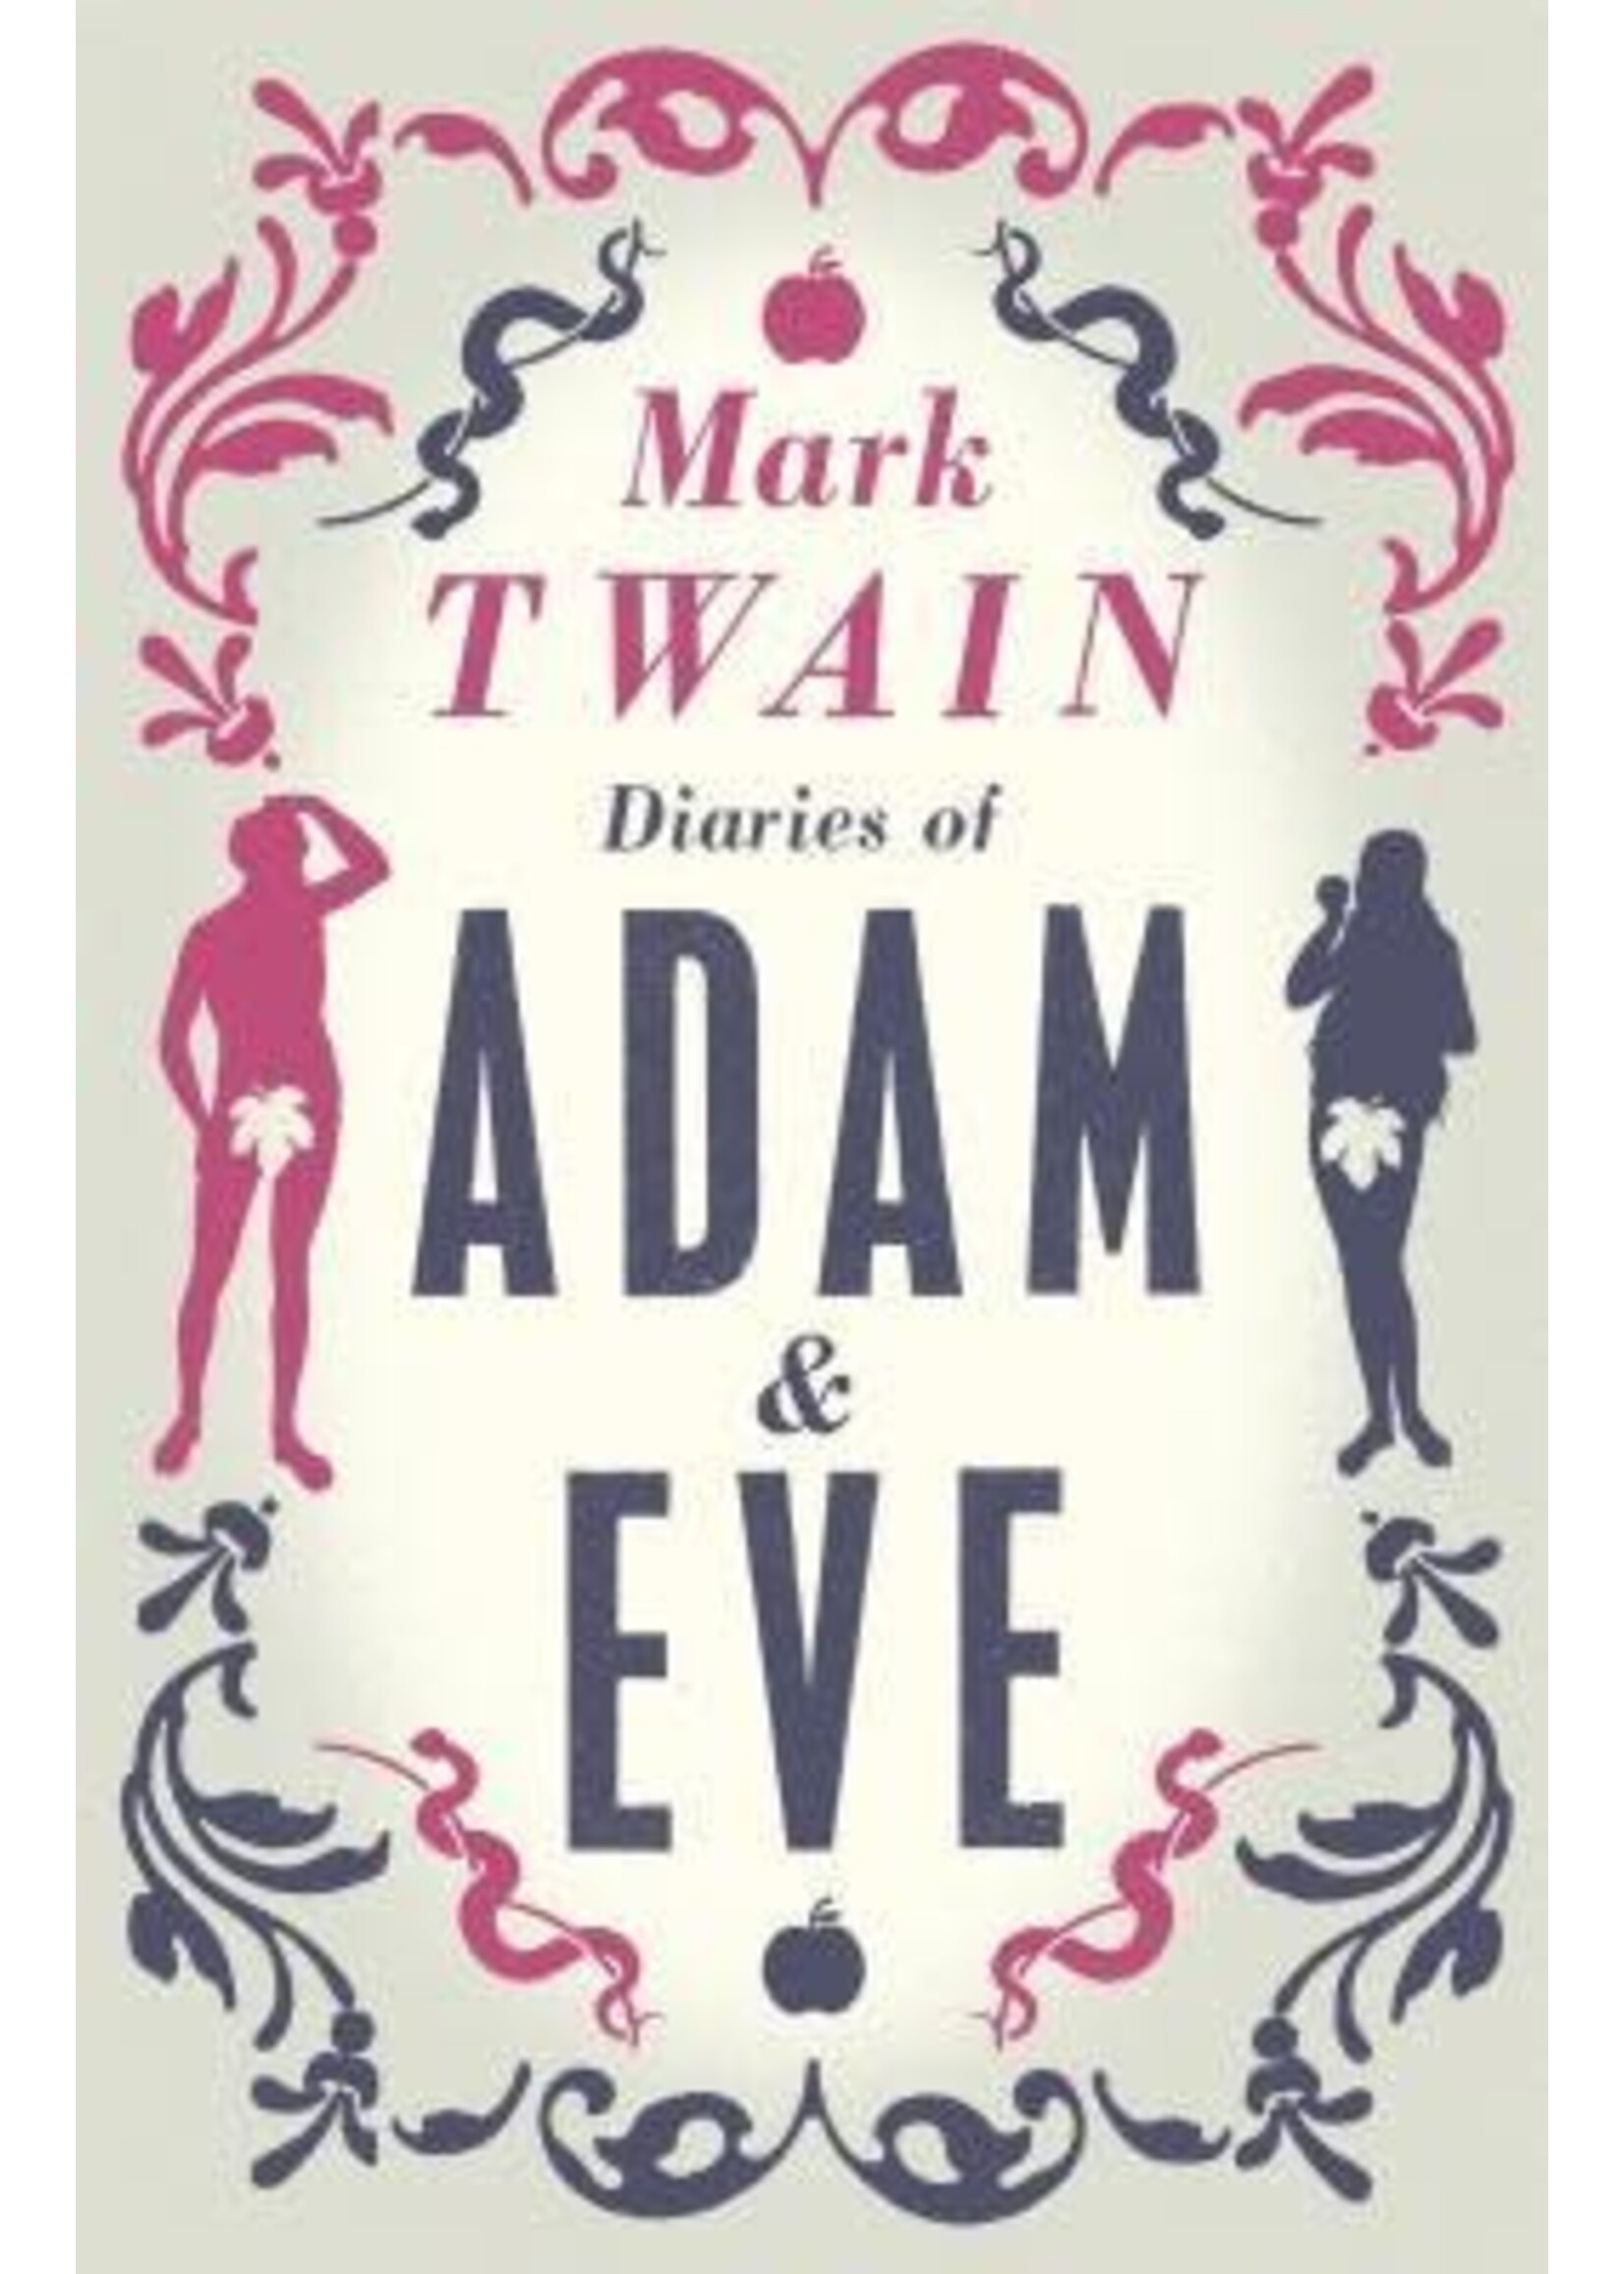 The Diaries of Adam & Eve by Mark Twain